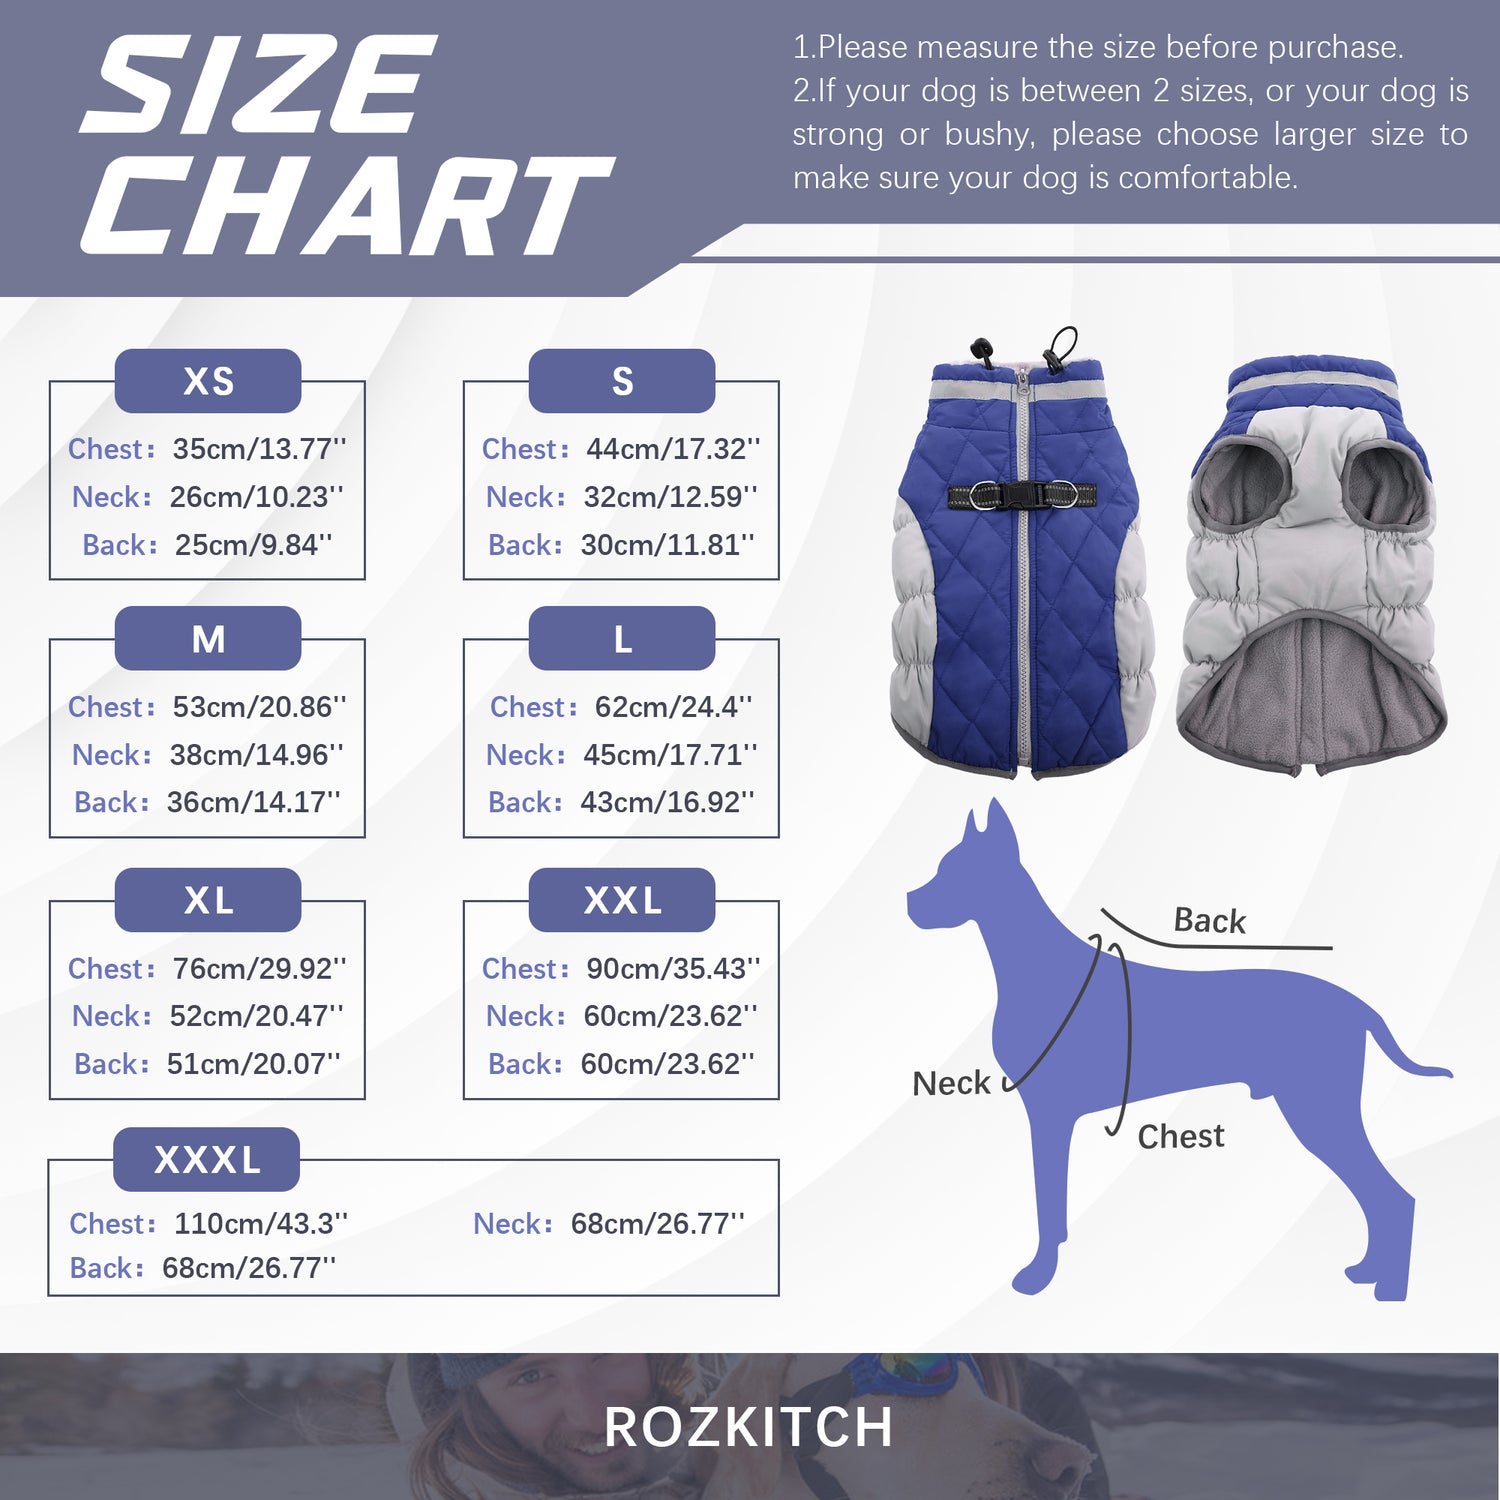 ROZKITCH Warm Dog Winter Coat Cold Weather Jacket Windproof Reflective Turtleneck with Neckline D-Ring for Leash Thick Fleece Lining Outdoor Padded Vest Small Medium Large Dogs